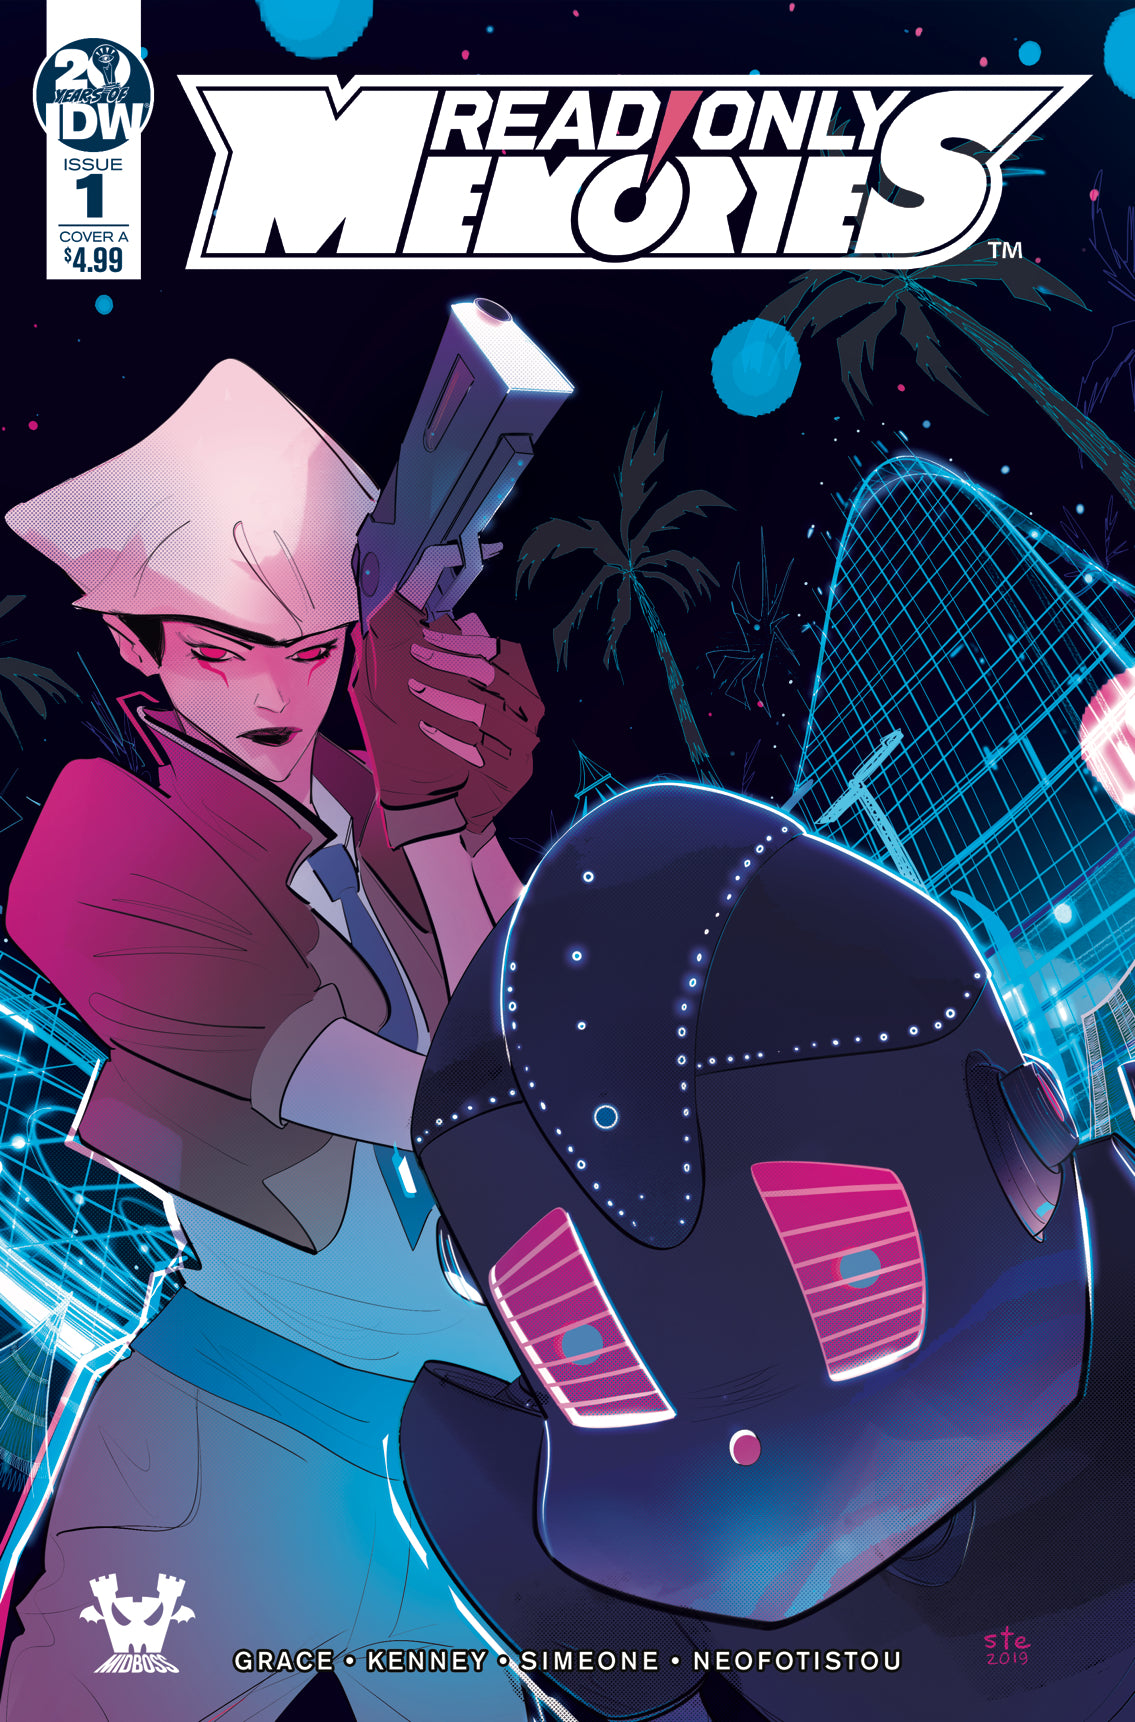 Read Only Memories #1 Cover A